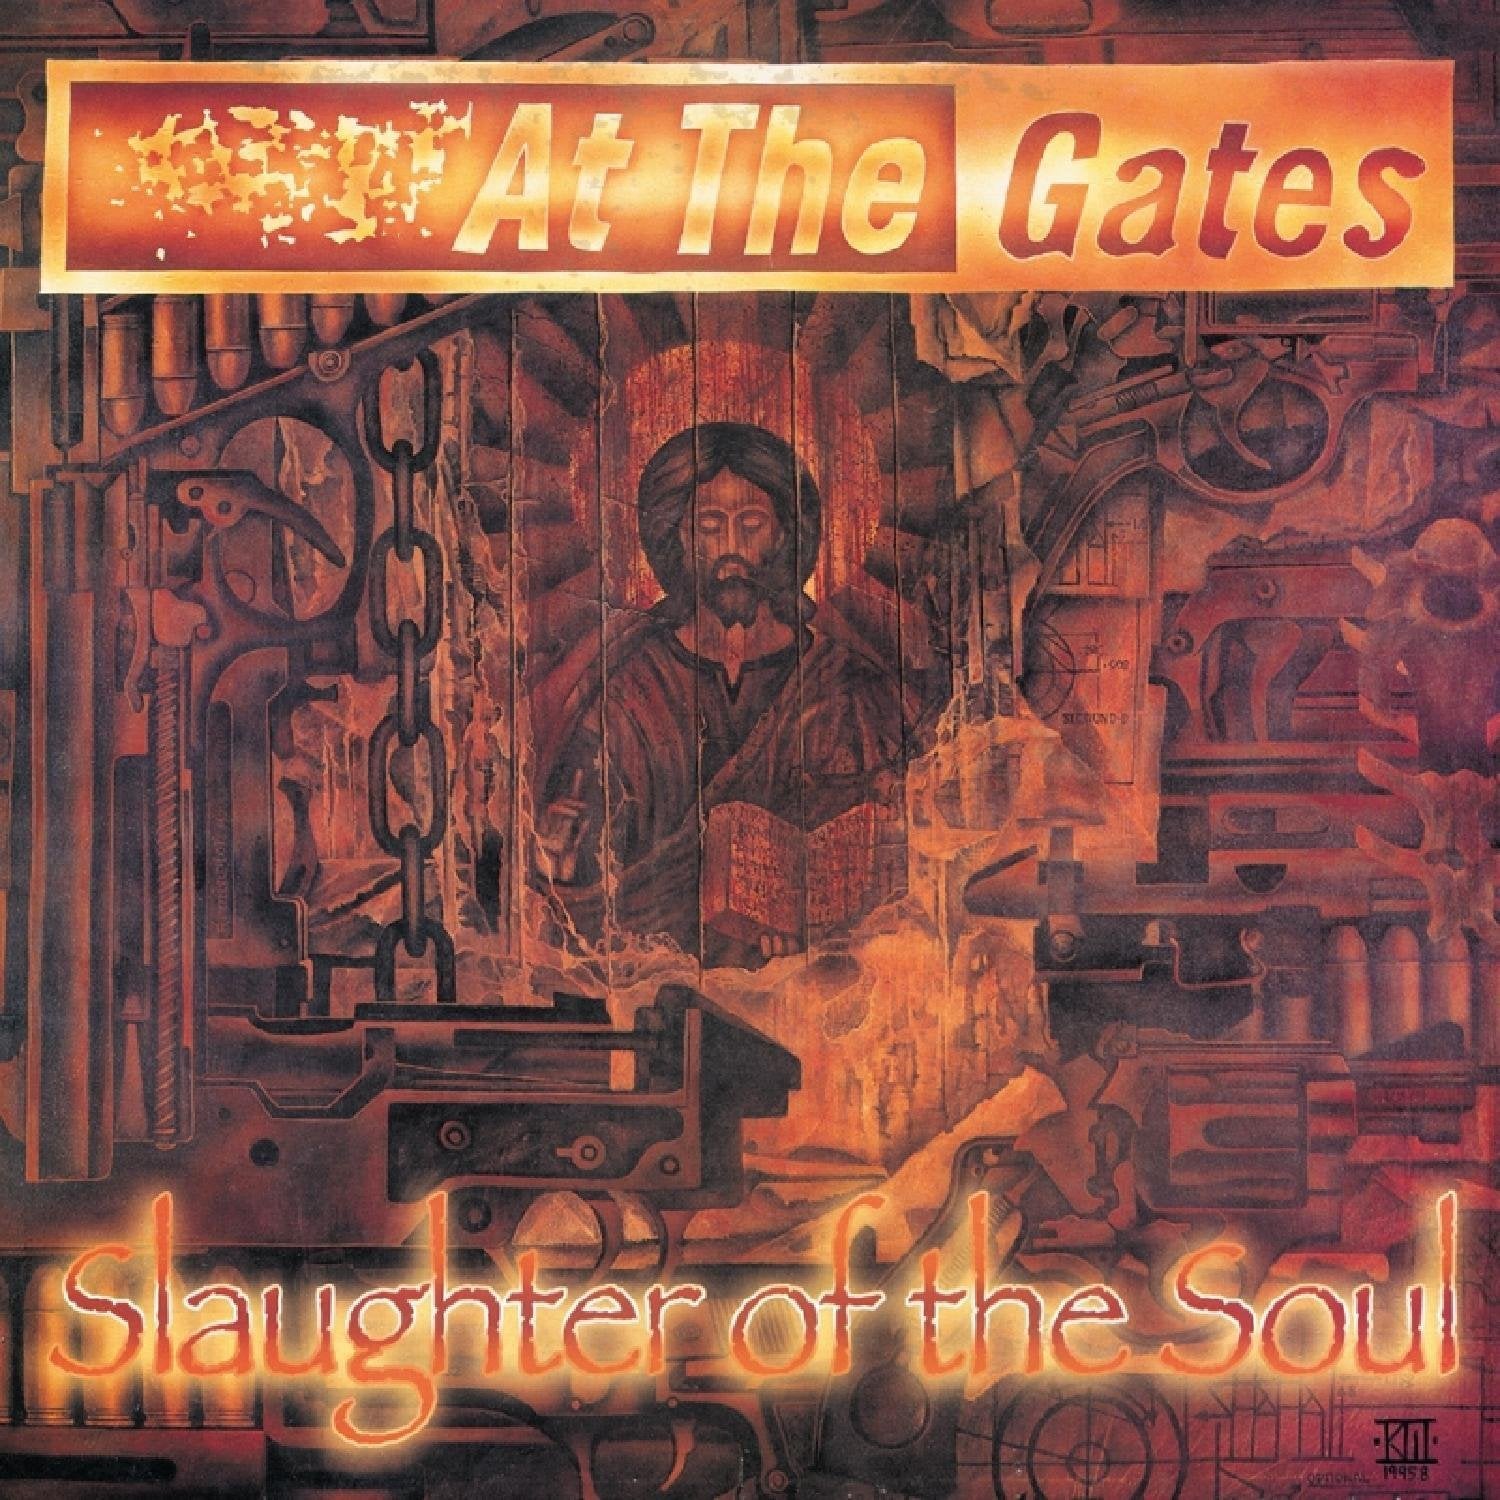 AT THE GATES - SLAUGHTER OF THE SOUL Vinyl LP